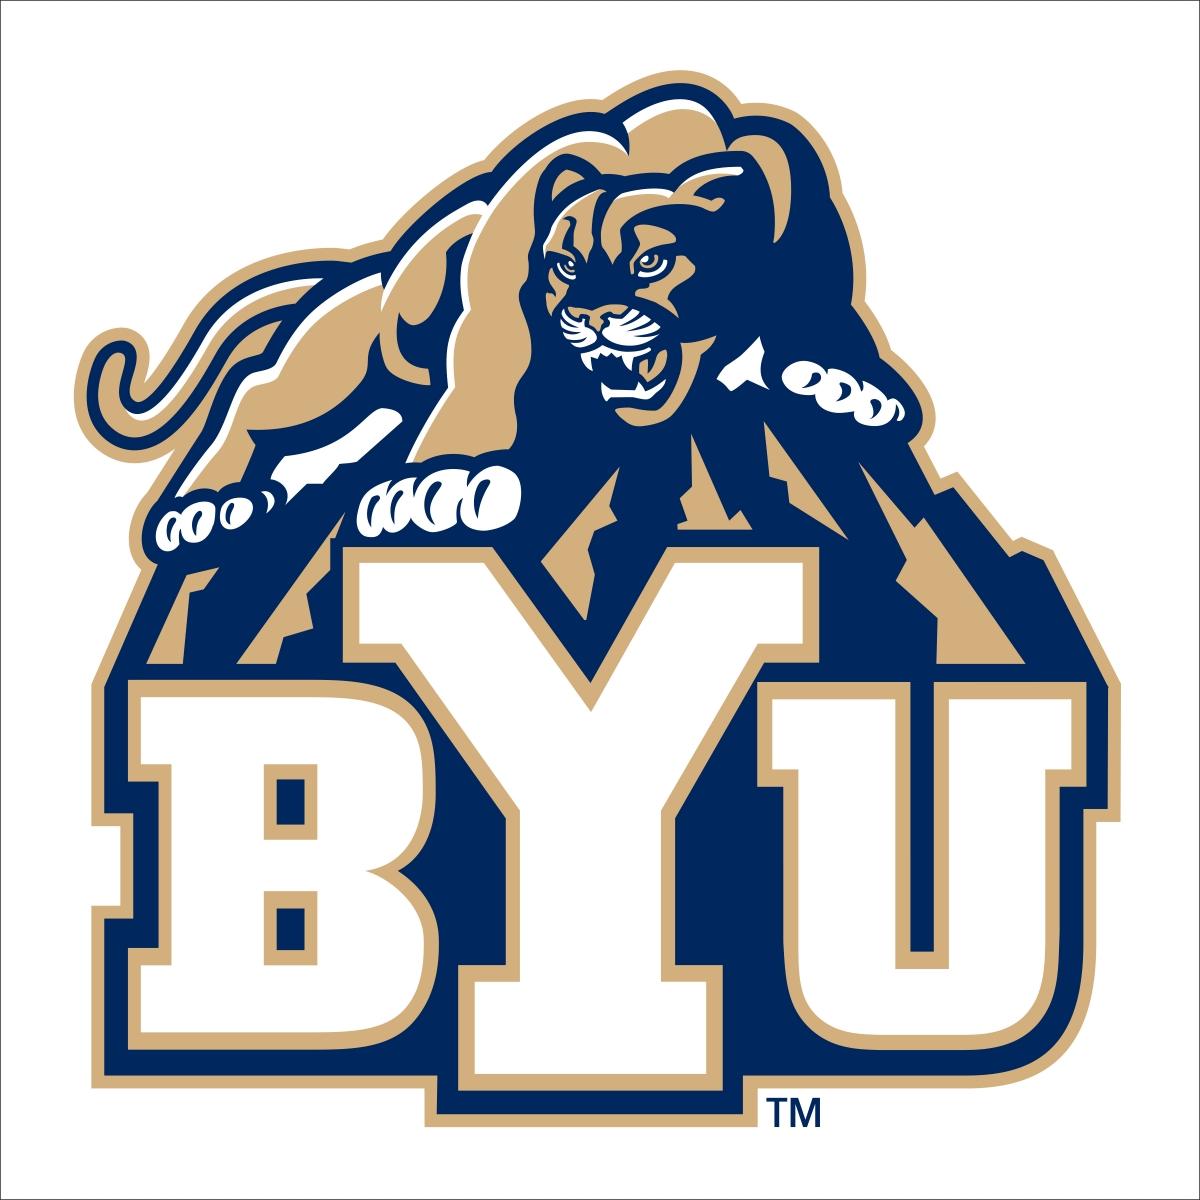 BYU Logo - LGBT Students At BYU Speak Out About Lack Of Inclusion. UPR Utah